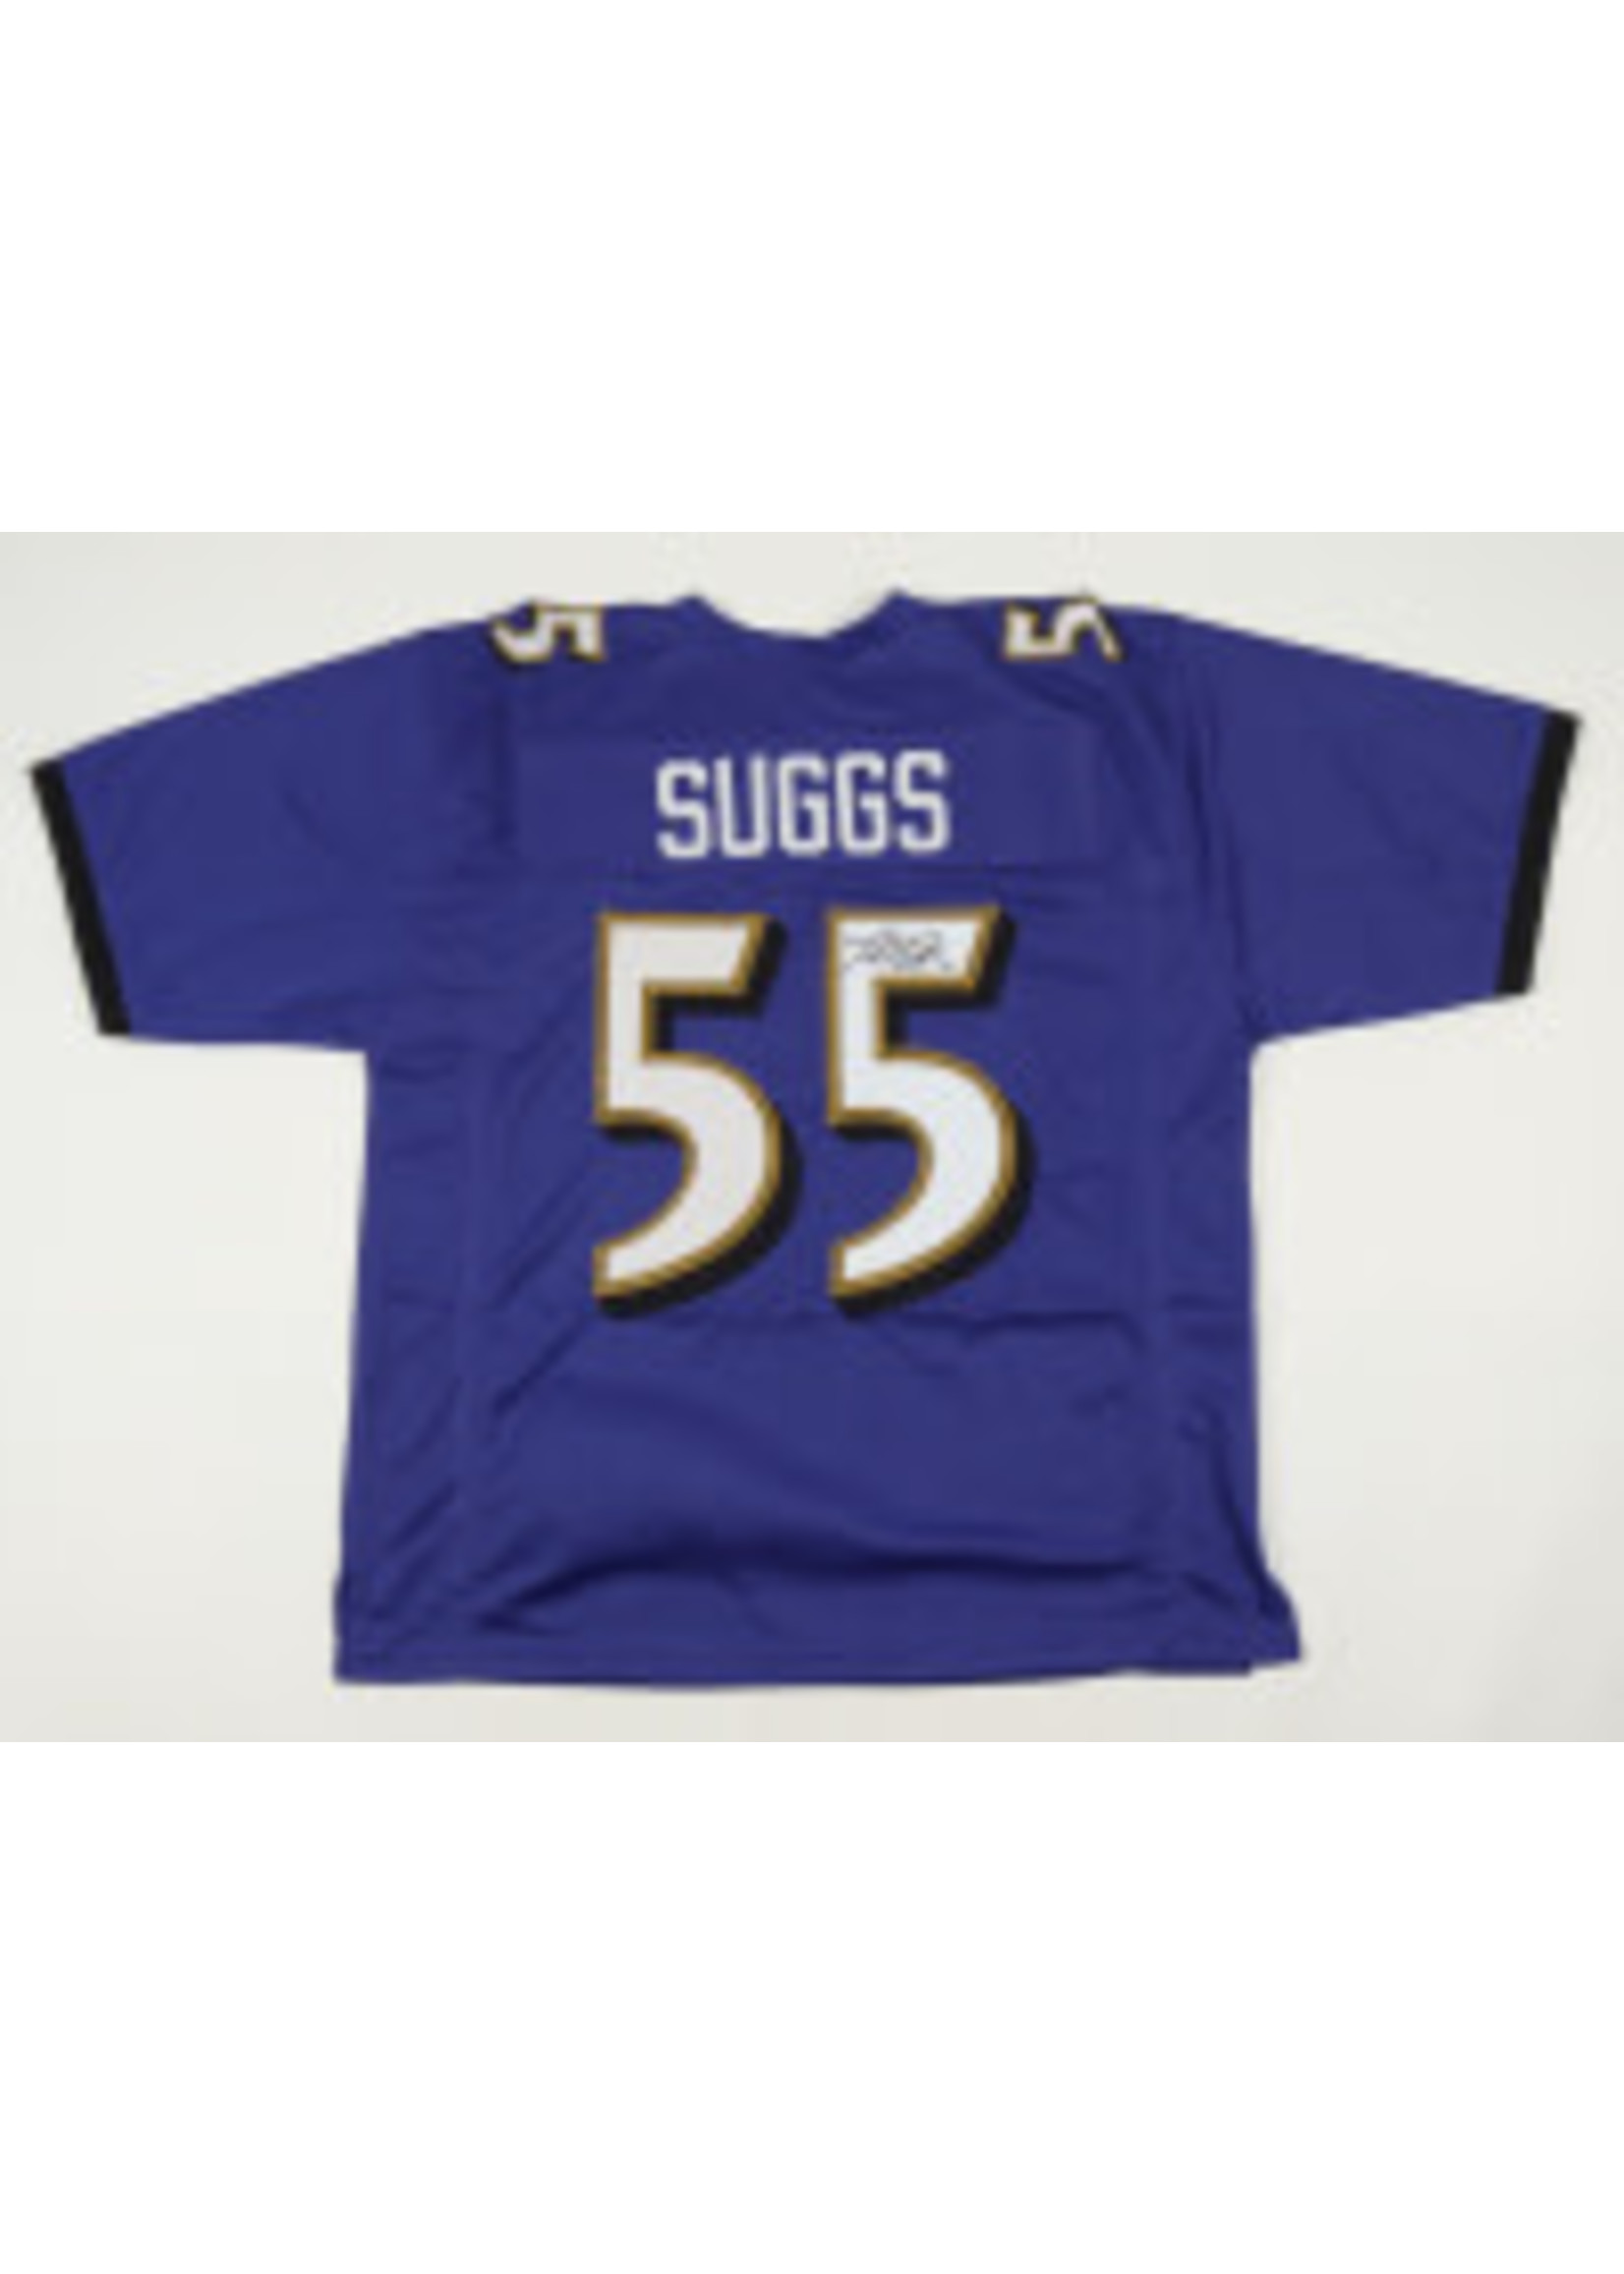 Terrell Suggs Jersey A